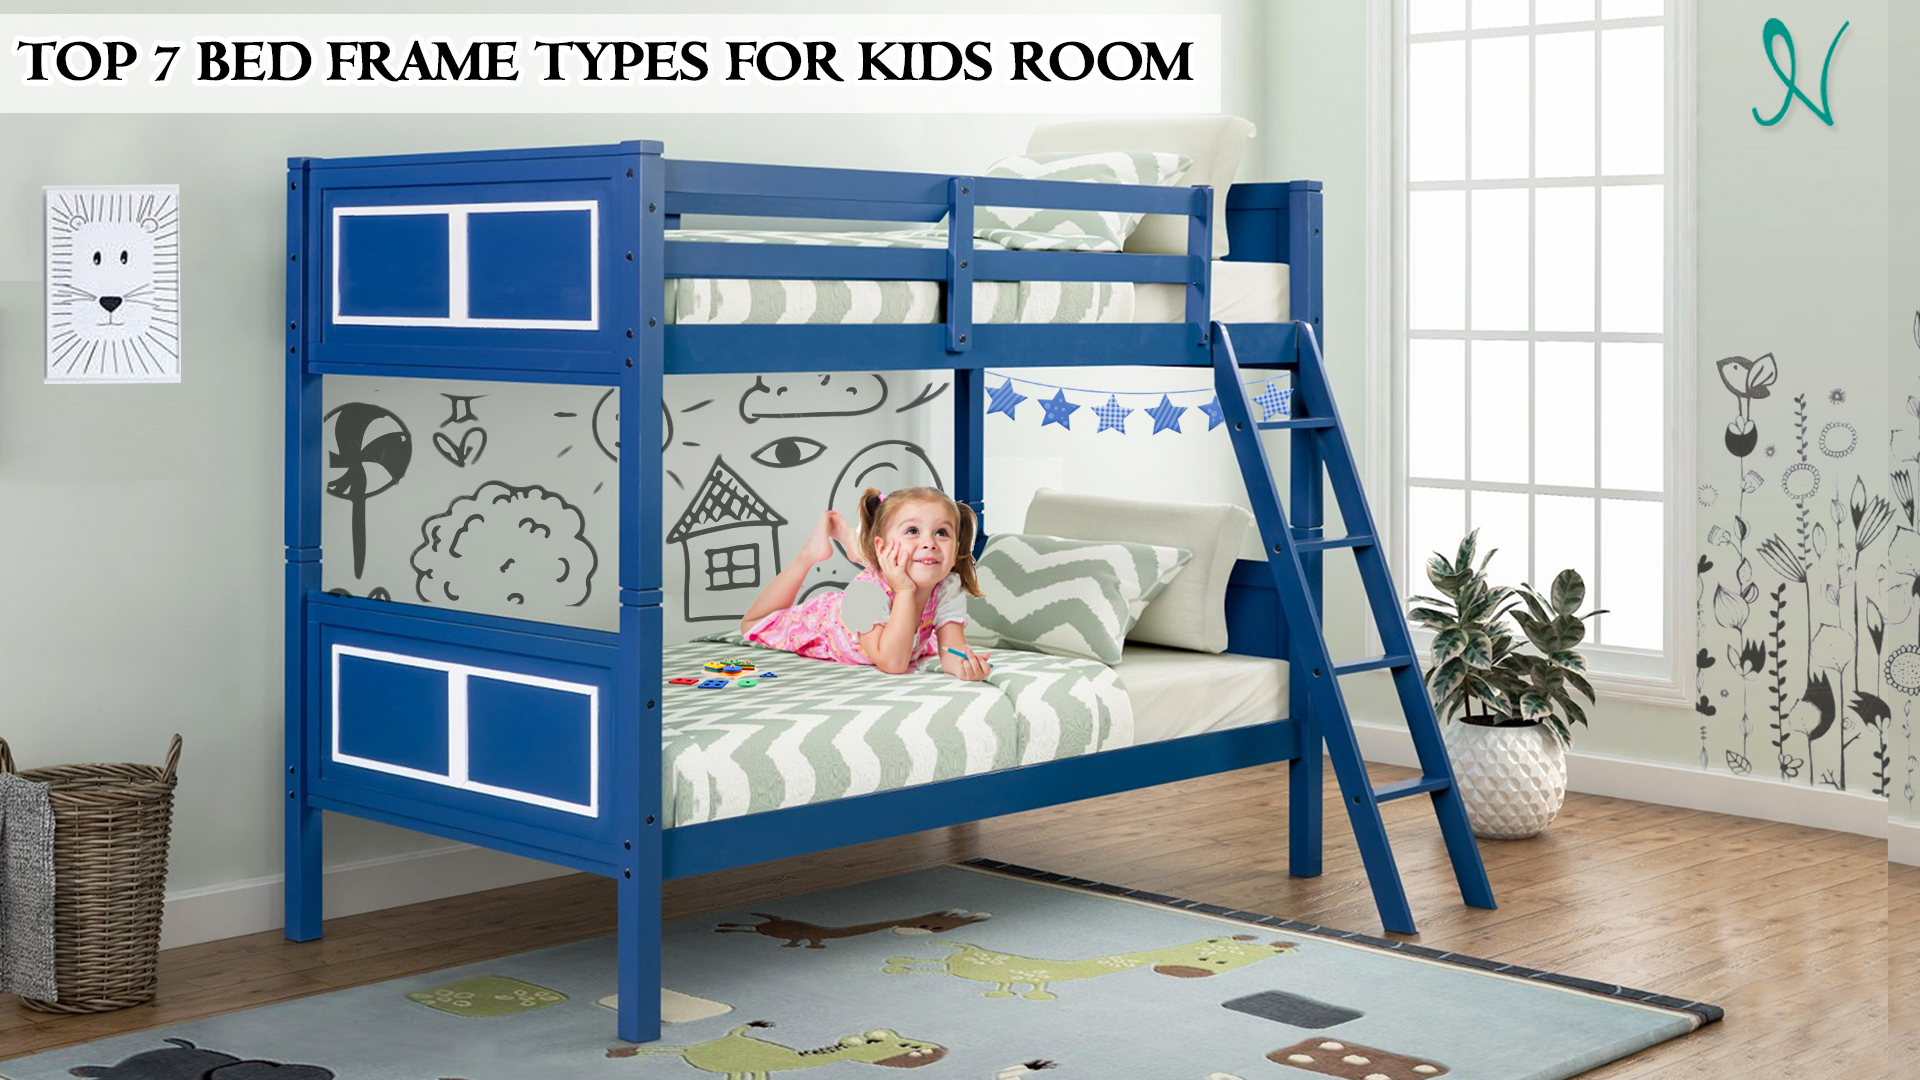 Top 7 Bed Frame Types For Kid’s Room